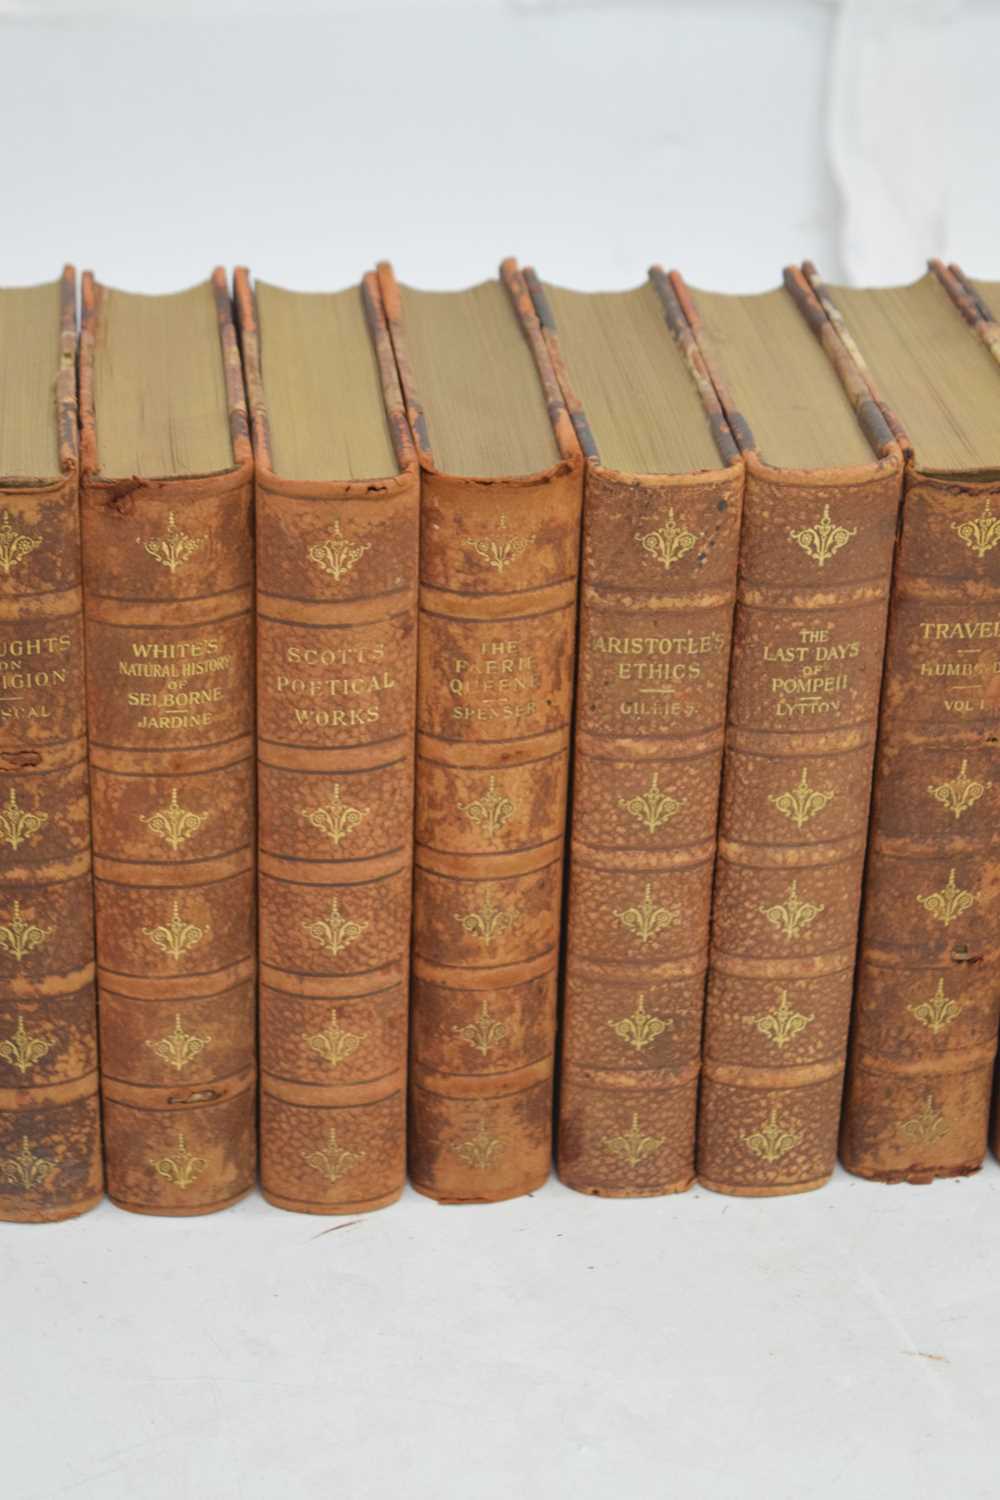 Twenty volumes from 'Sir John Lubbock's Hundred Books', leather bound, circa 1898 - Image 5 of 10